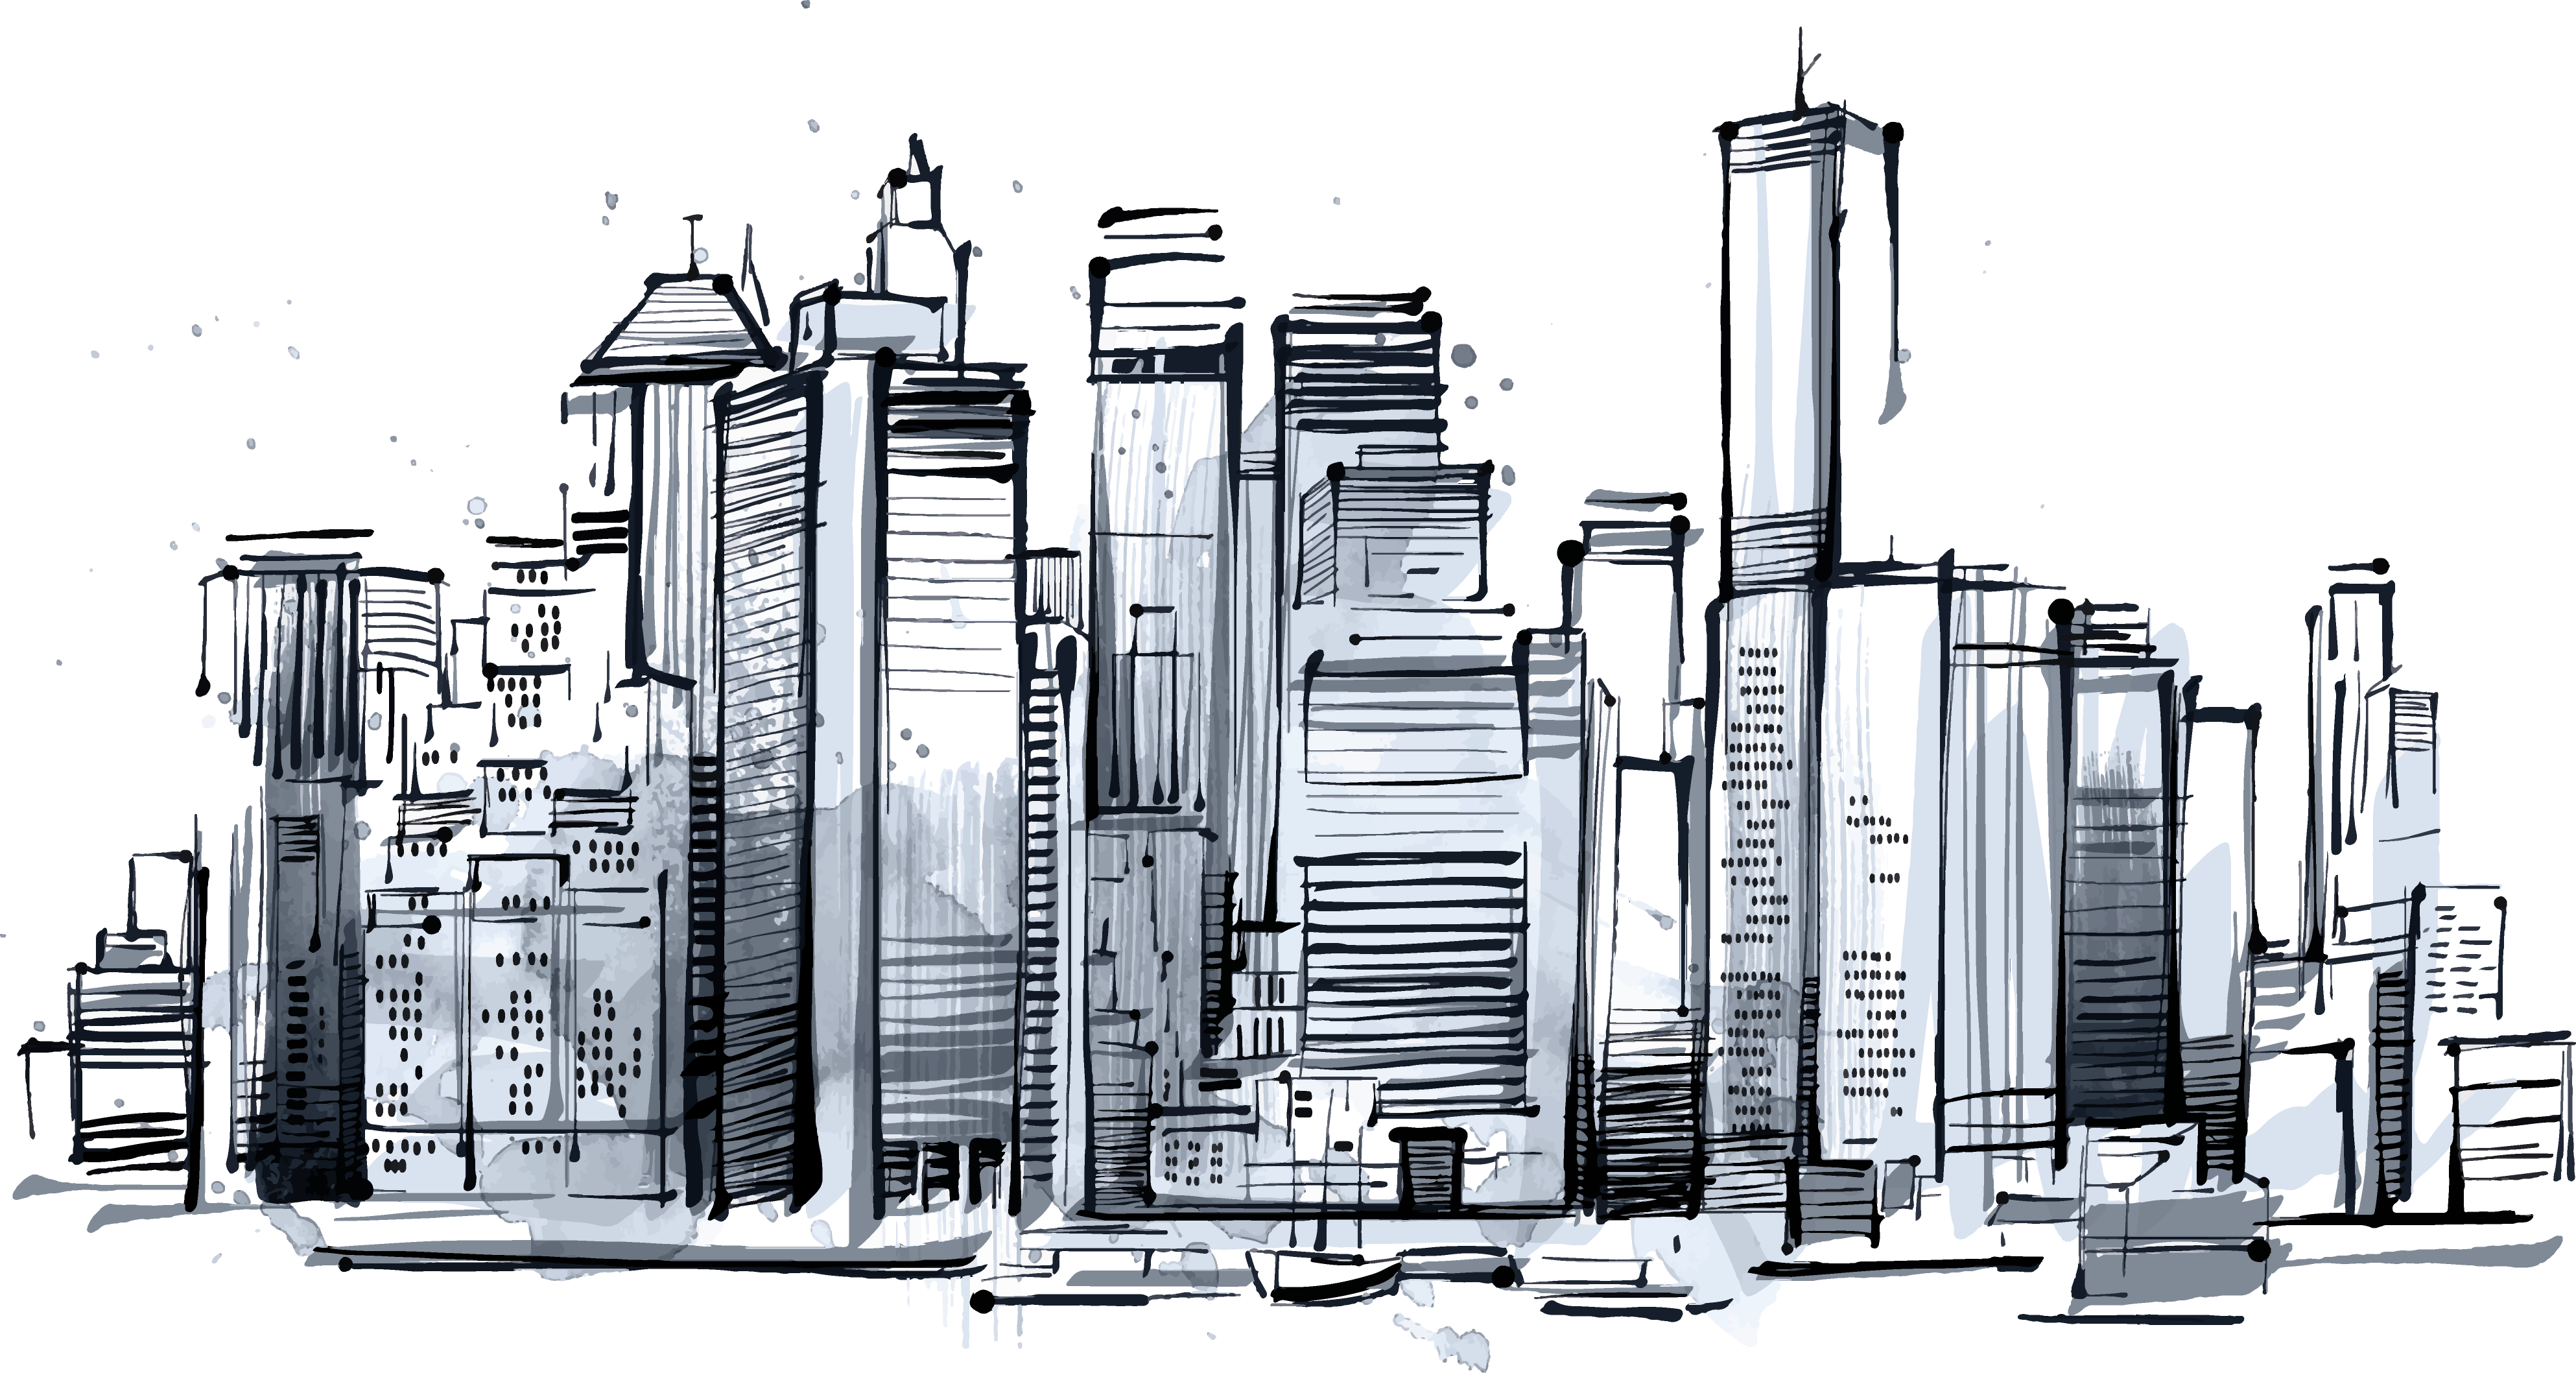 Download Skyscraper Png Picture  New York Building Sketch PNG Image with  No Background  PNGkeycom